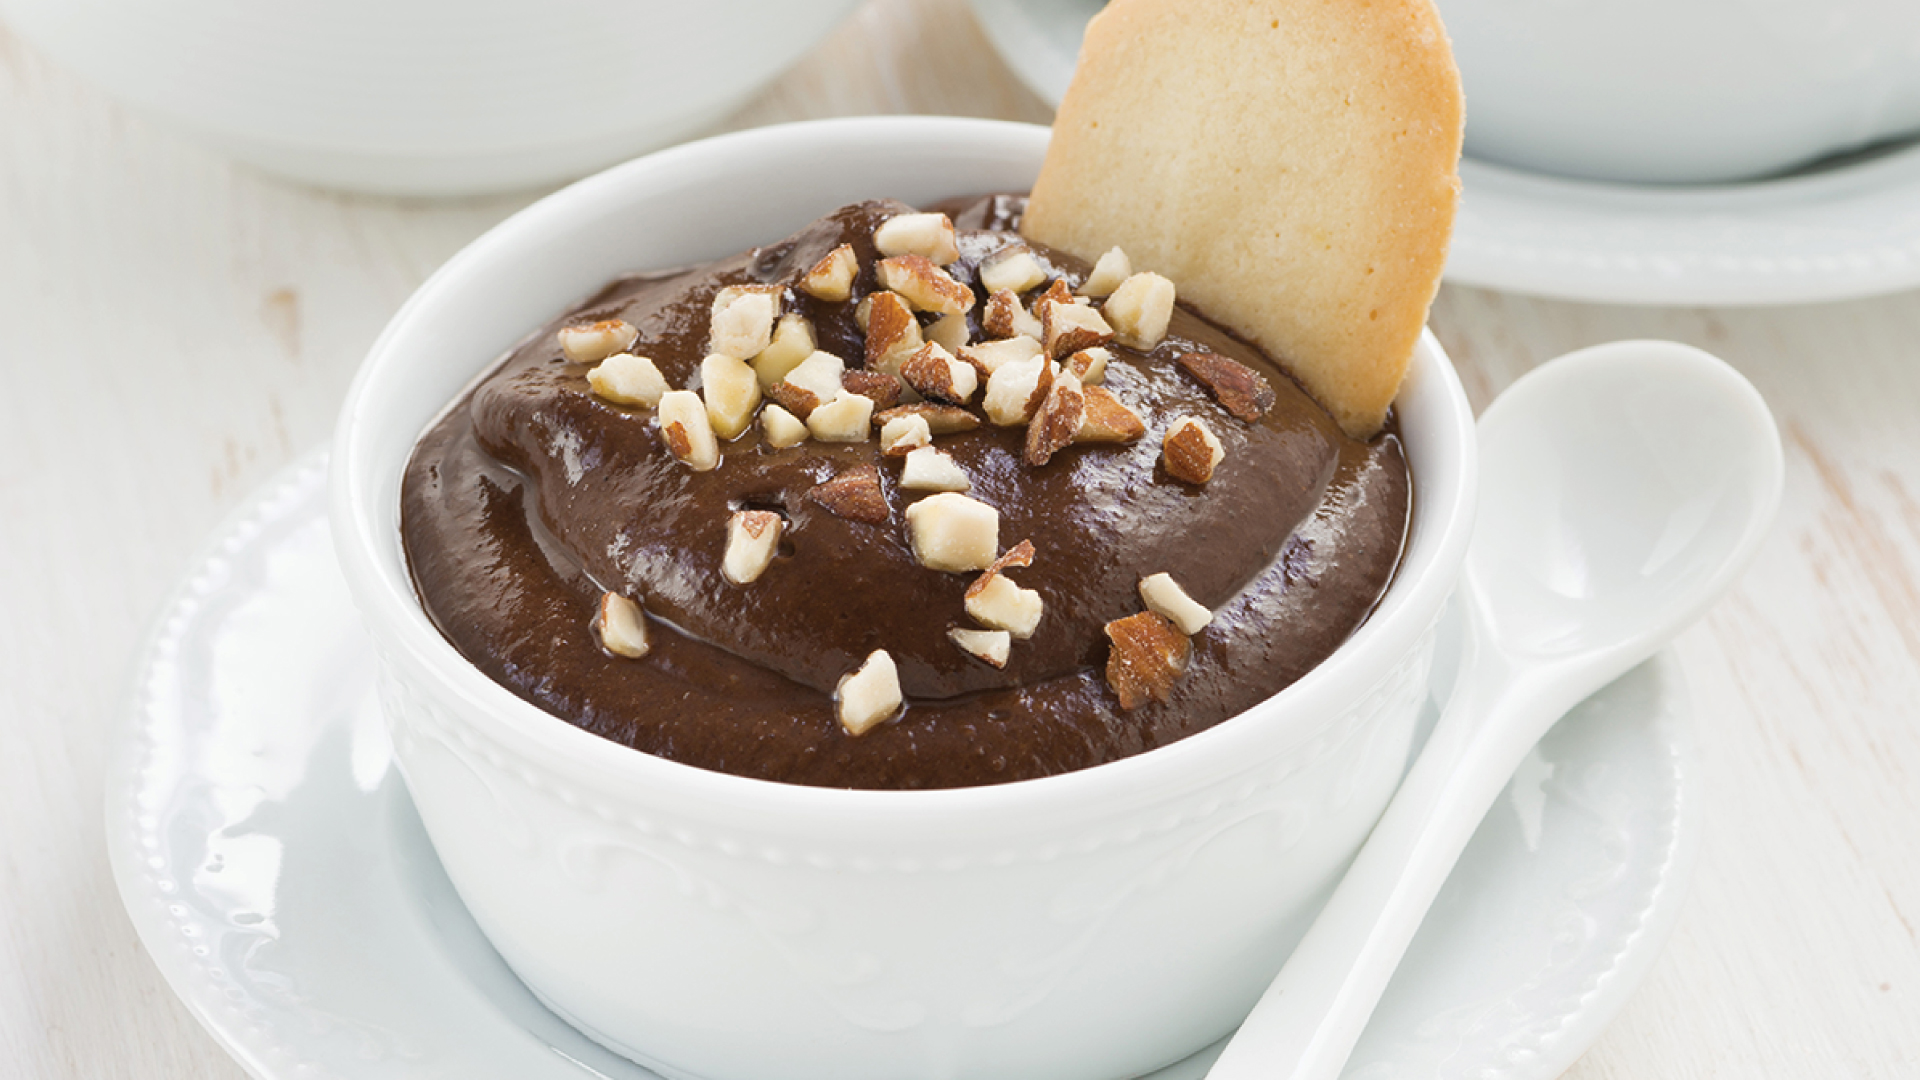 Featured Image for “Creamy Maca Nut Chocolate Pudding”